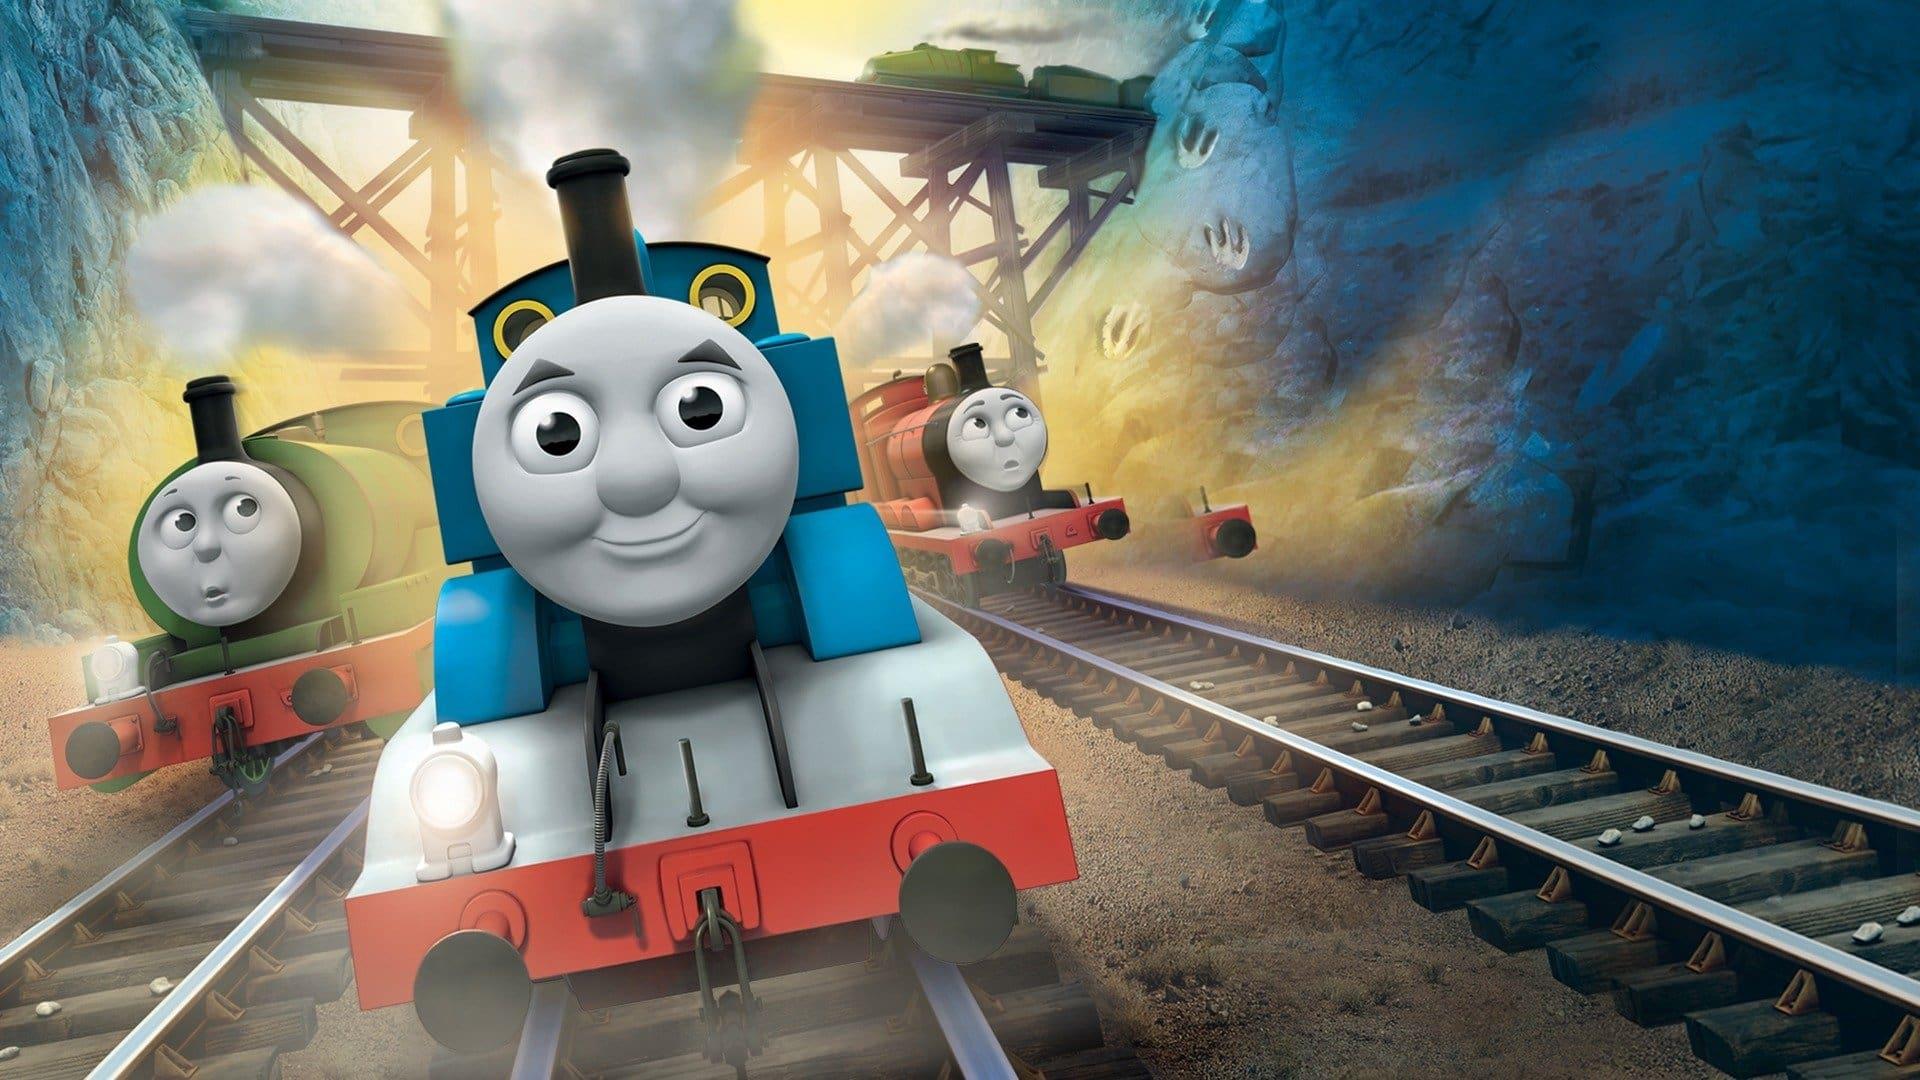 Thomas & Friends: Tale of the Brave: The Movie backdrop